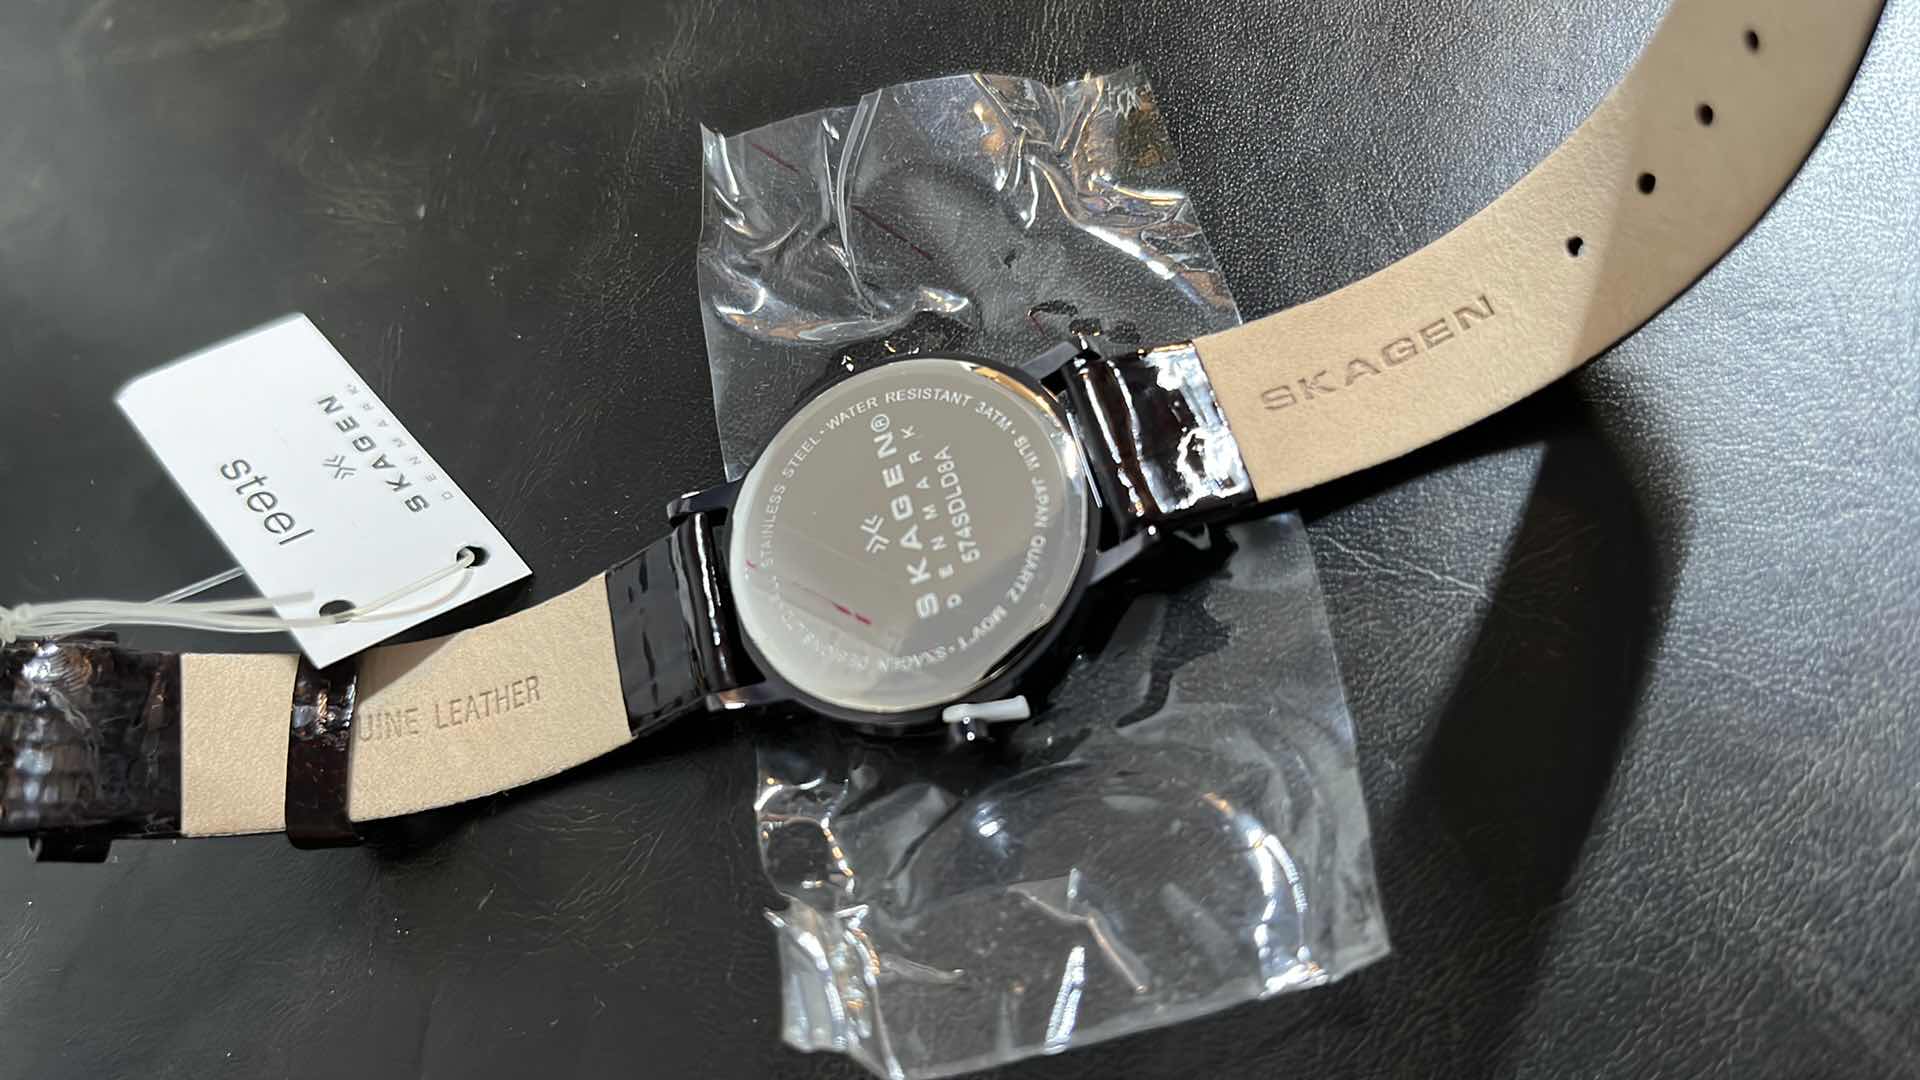 Photo 5 of NEW WOMENS SKAGEN STEEL WATCH W STAINLESS STEEL CASE & GENUINE LEATHER STRAP, PURPLE MOTHER OF PEARL INLAY W SWAROVSKI CRYSTALS, INCLUDES ORIGINAL BOX MODEL 574SDLD8A